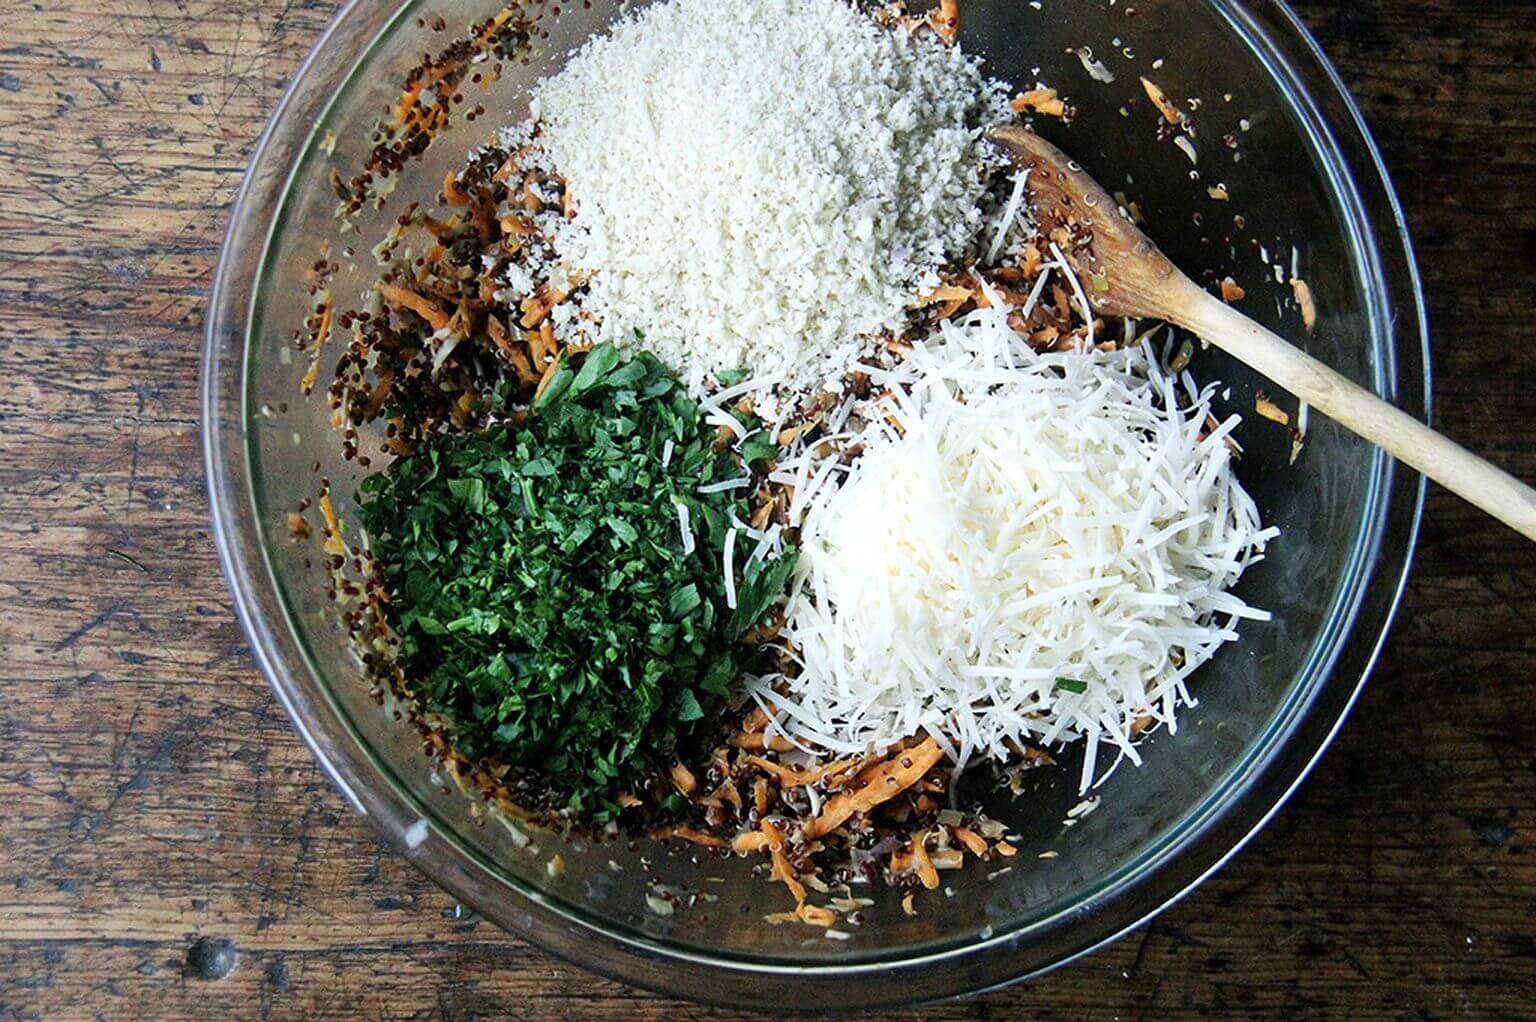 A bowl of grated sweet potatoes, herbs, bread crumbs, cheese, and mushrooms for veggie burgers.